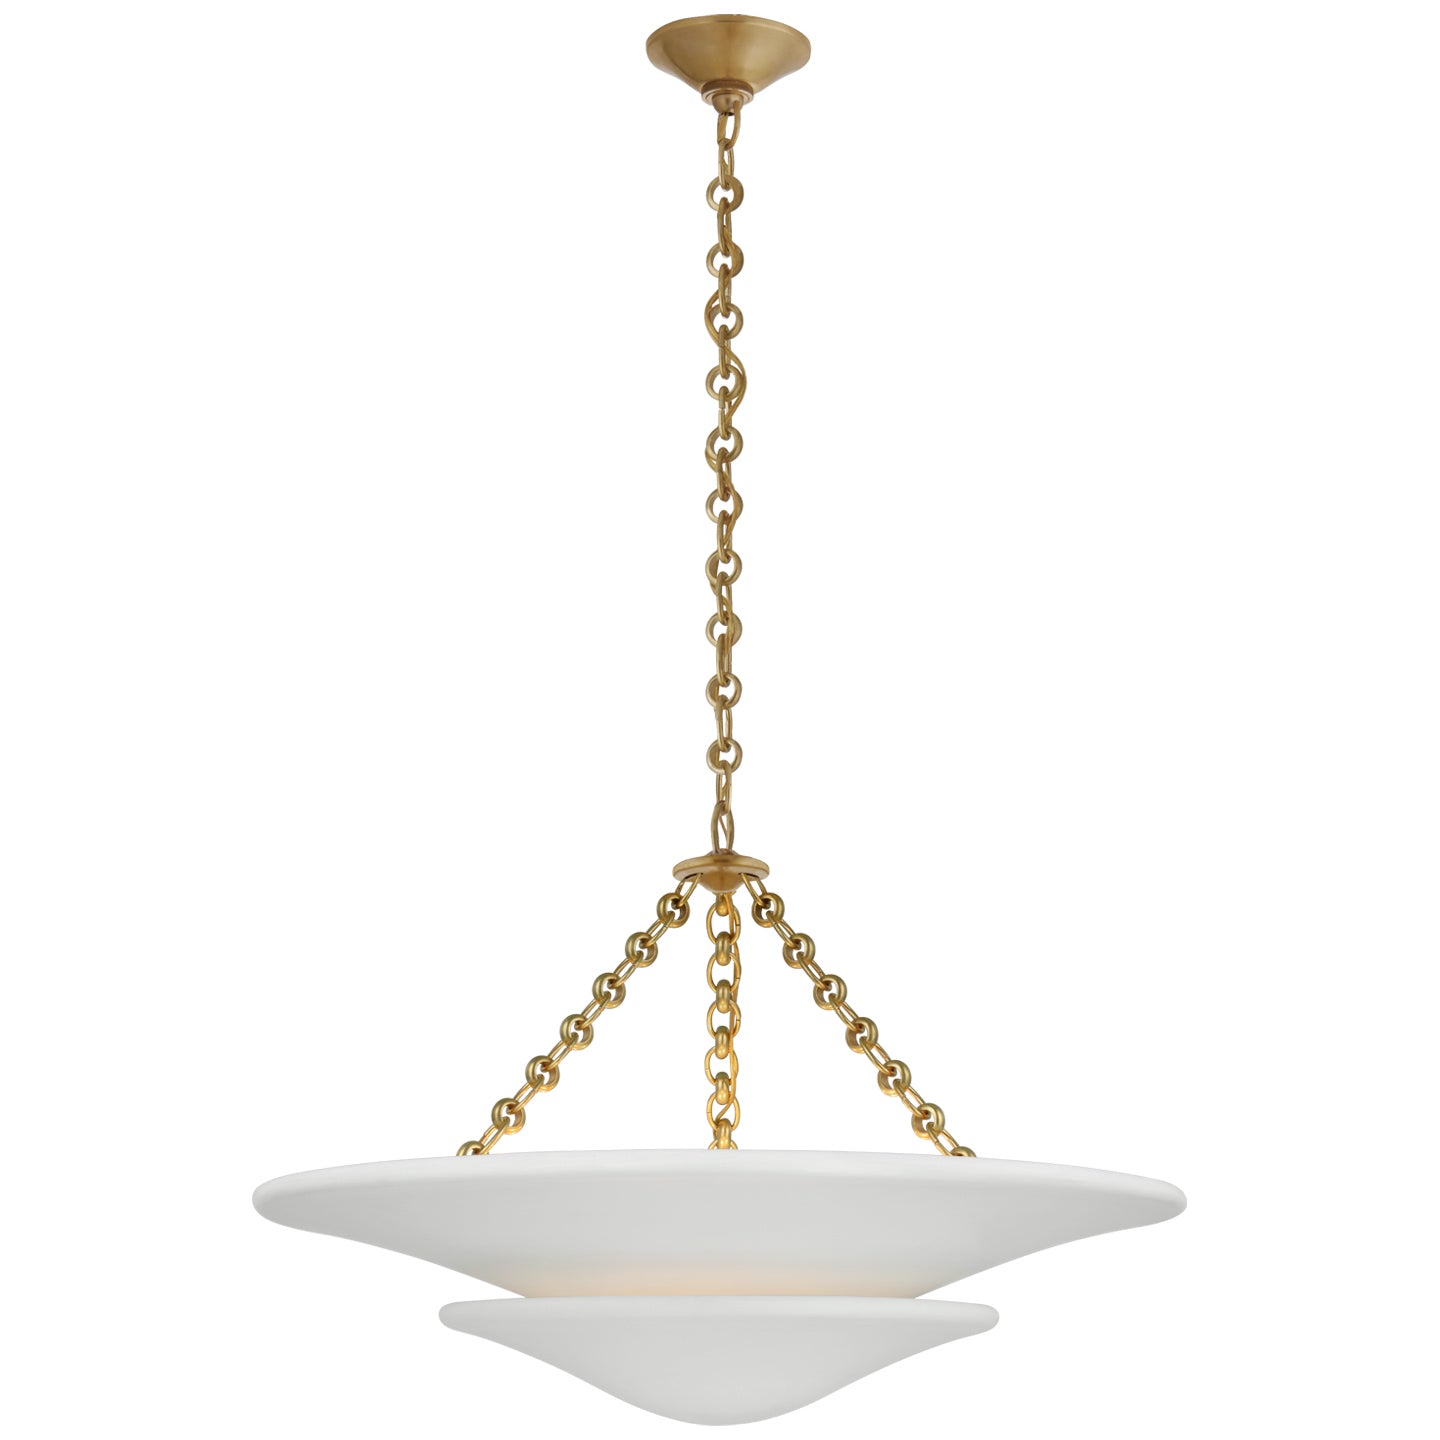 Load image into Gallery viewer, Visual Comfort Signature - ARN 5425HAB-PW - LED Chandelier - Mollino - Hand-Rubbed Antique Brass
